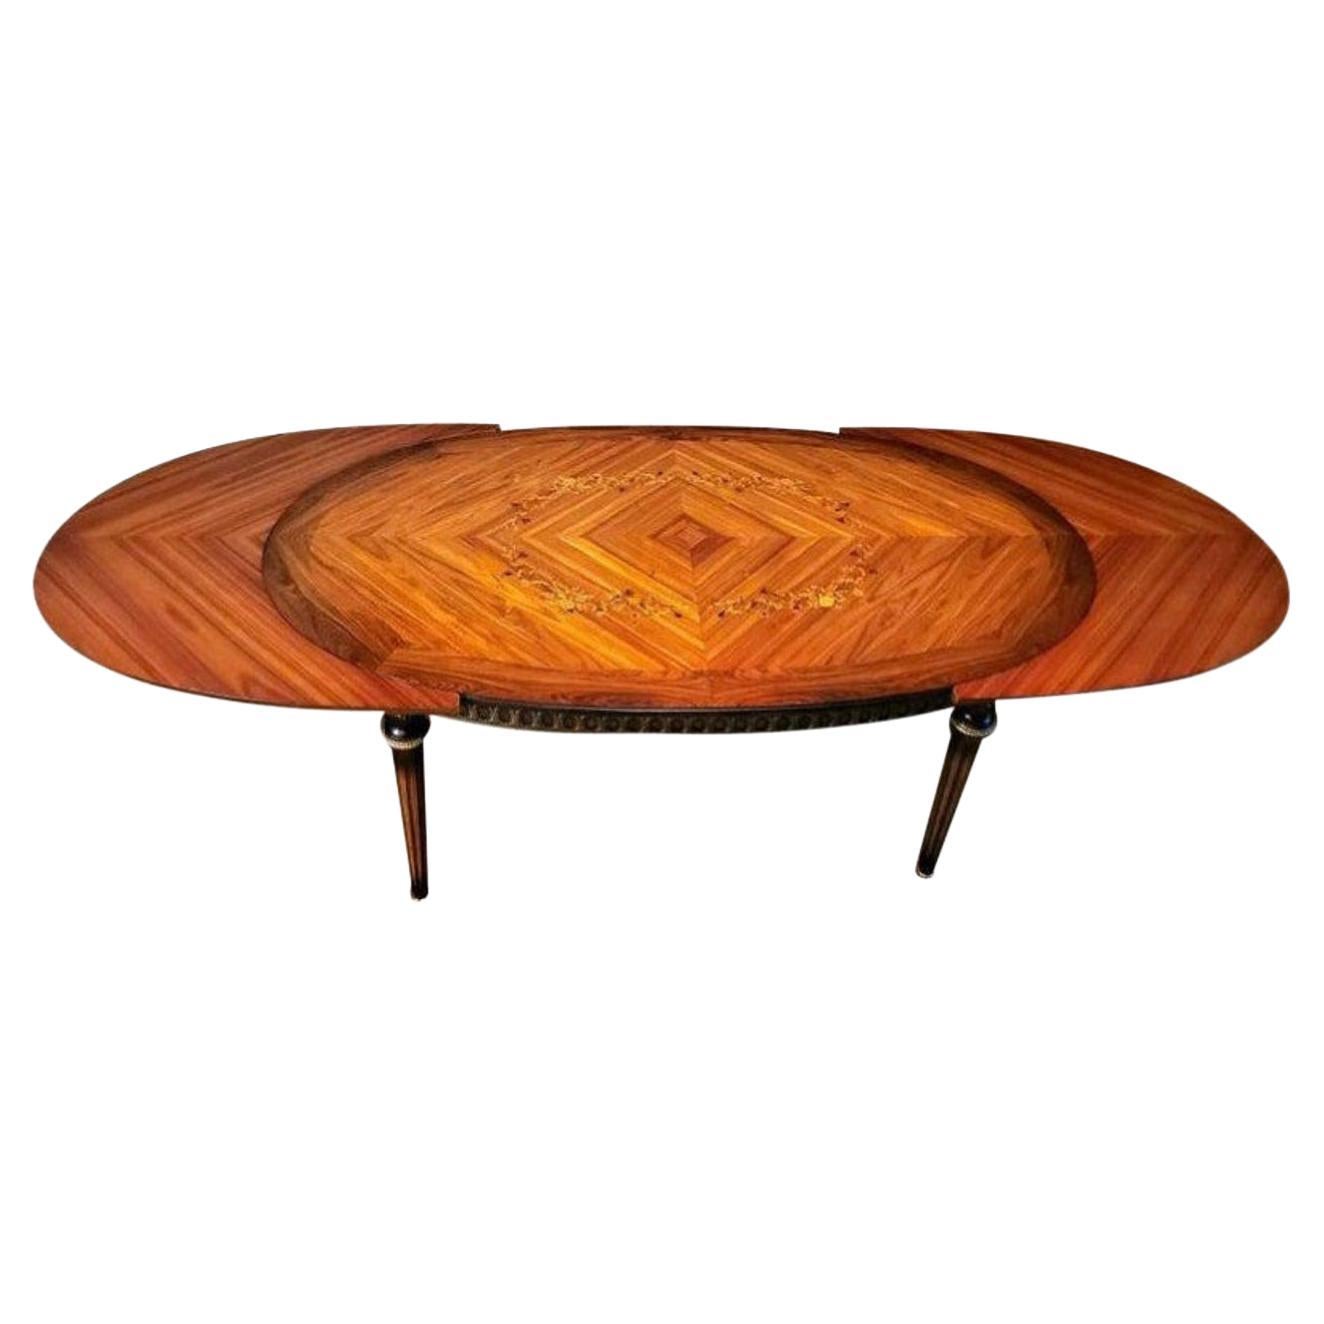 Fine JP Ehalt Signed French Louis XVI Style Rosewood Marquetry Dining Table For Sale